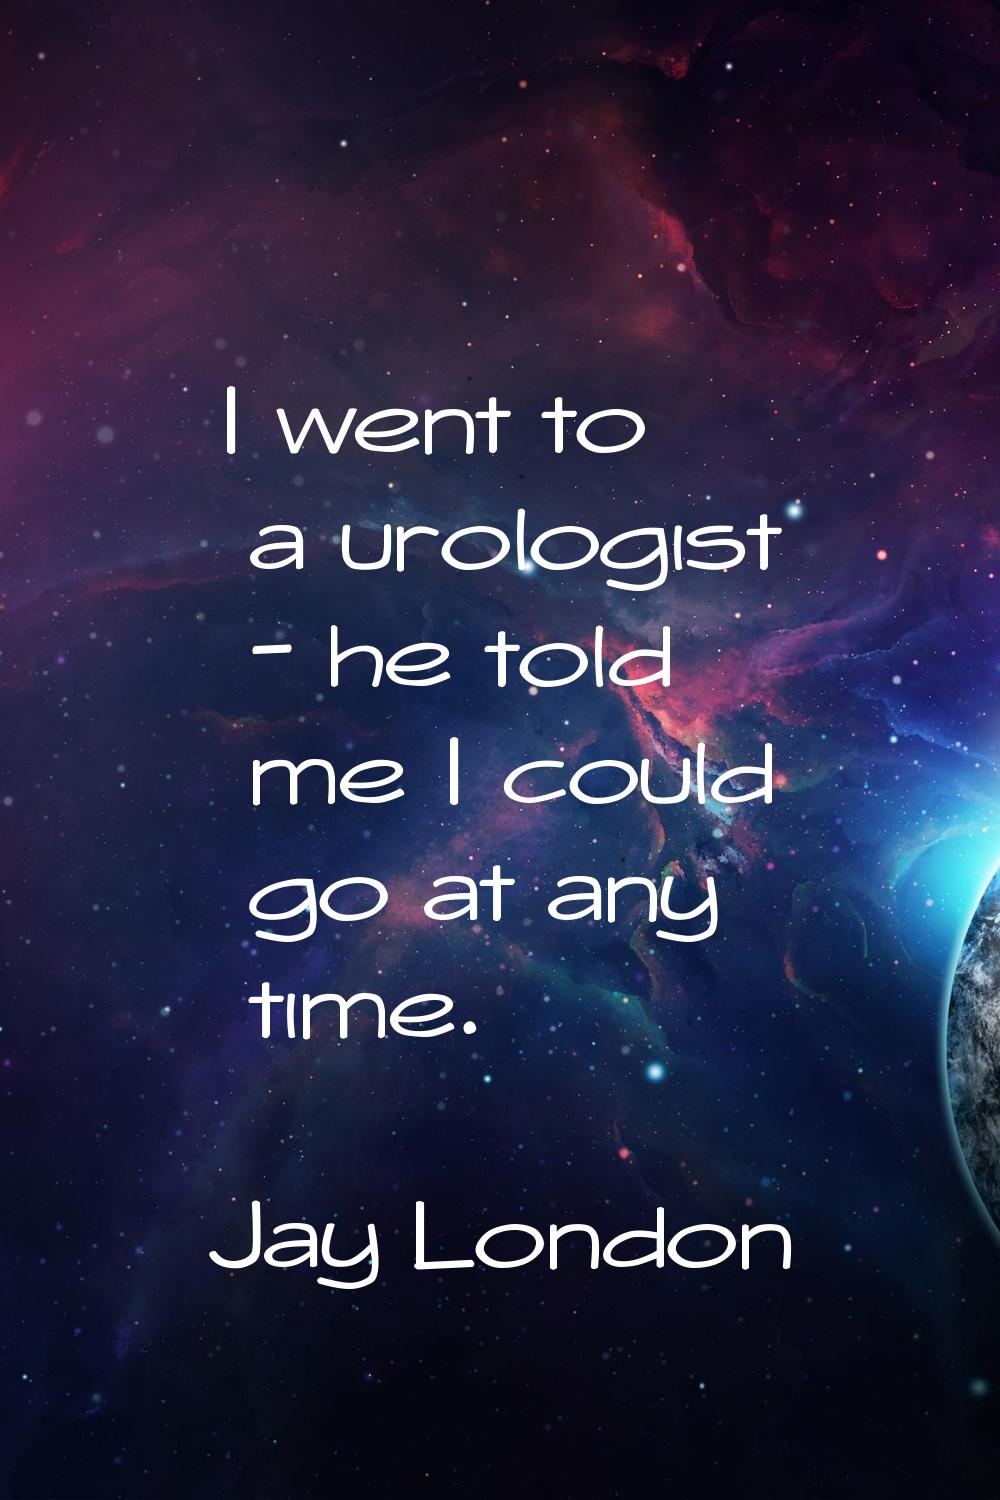 I went to a urologist - he told me I could go at any time.